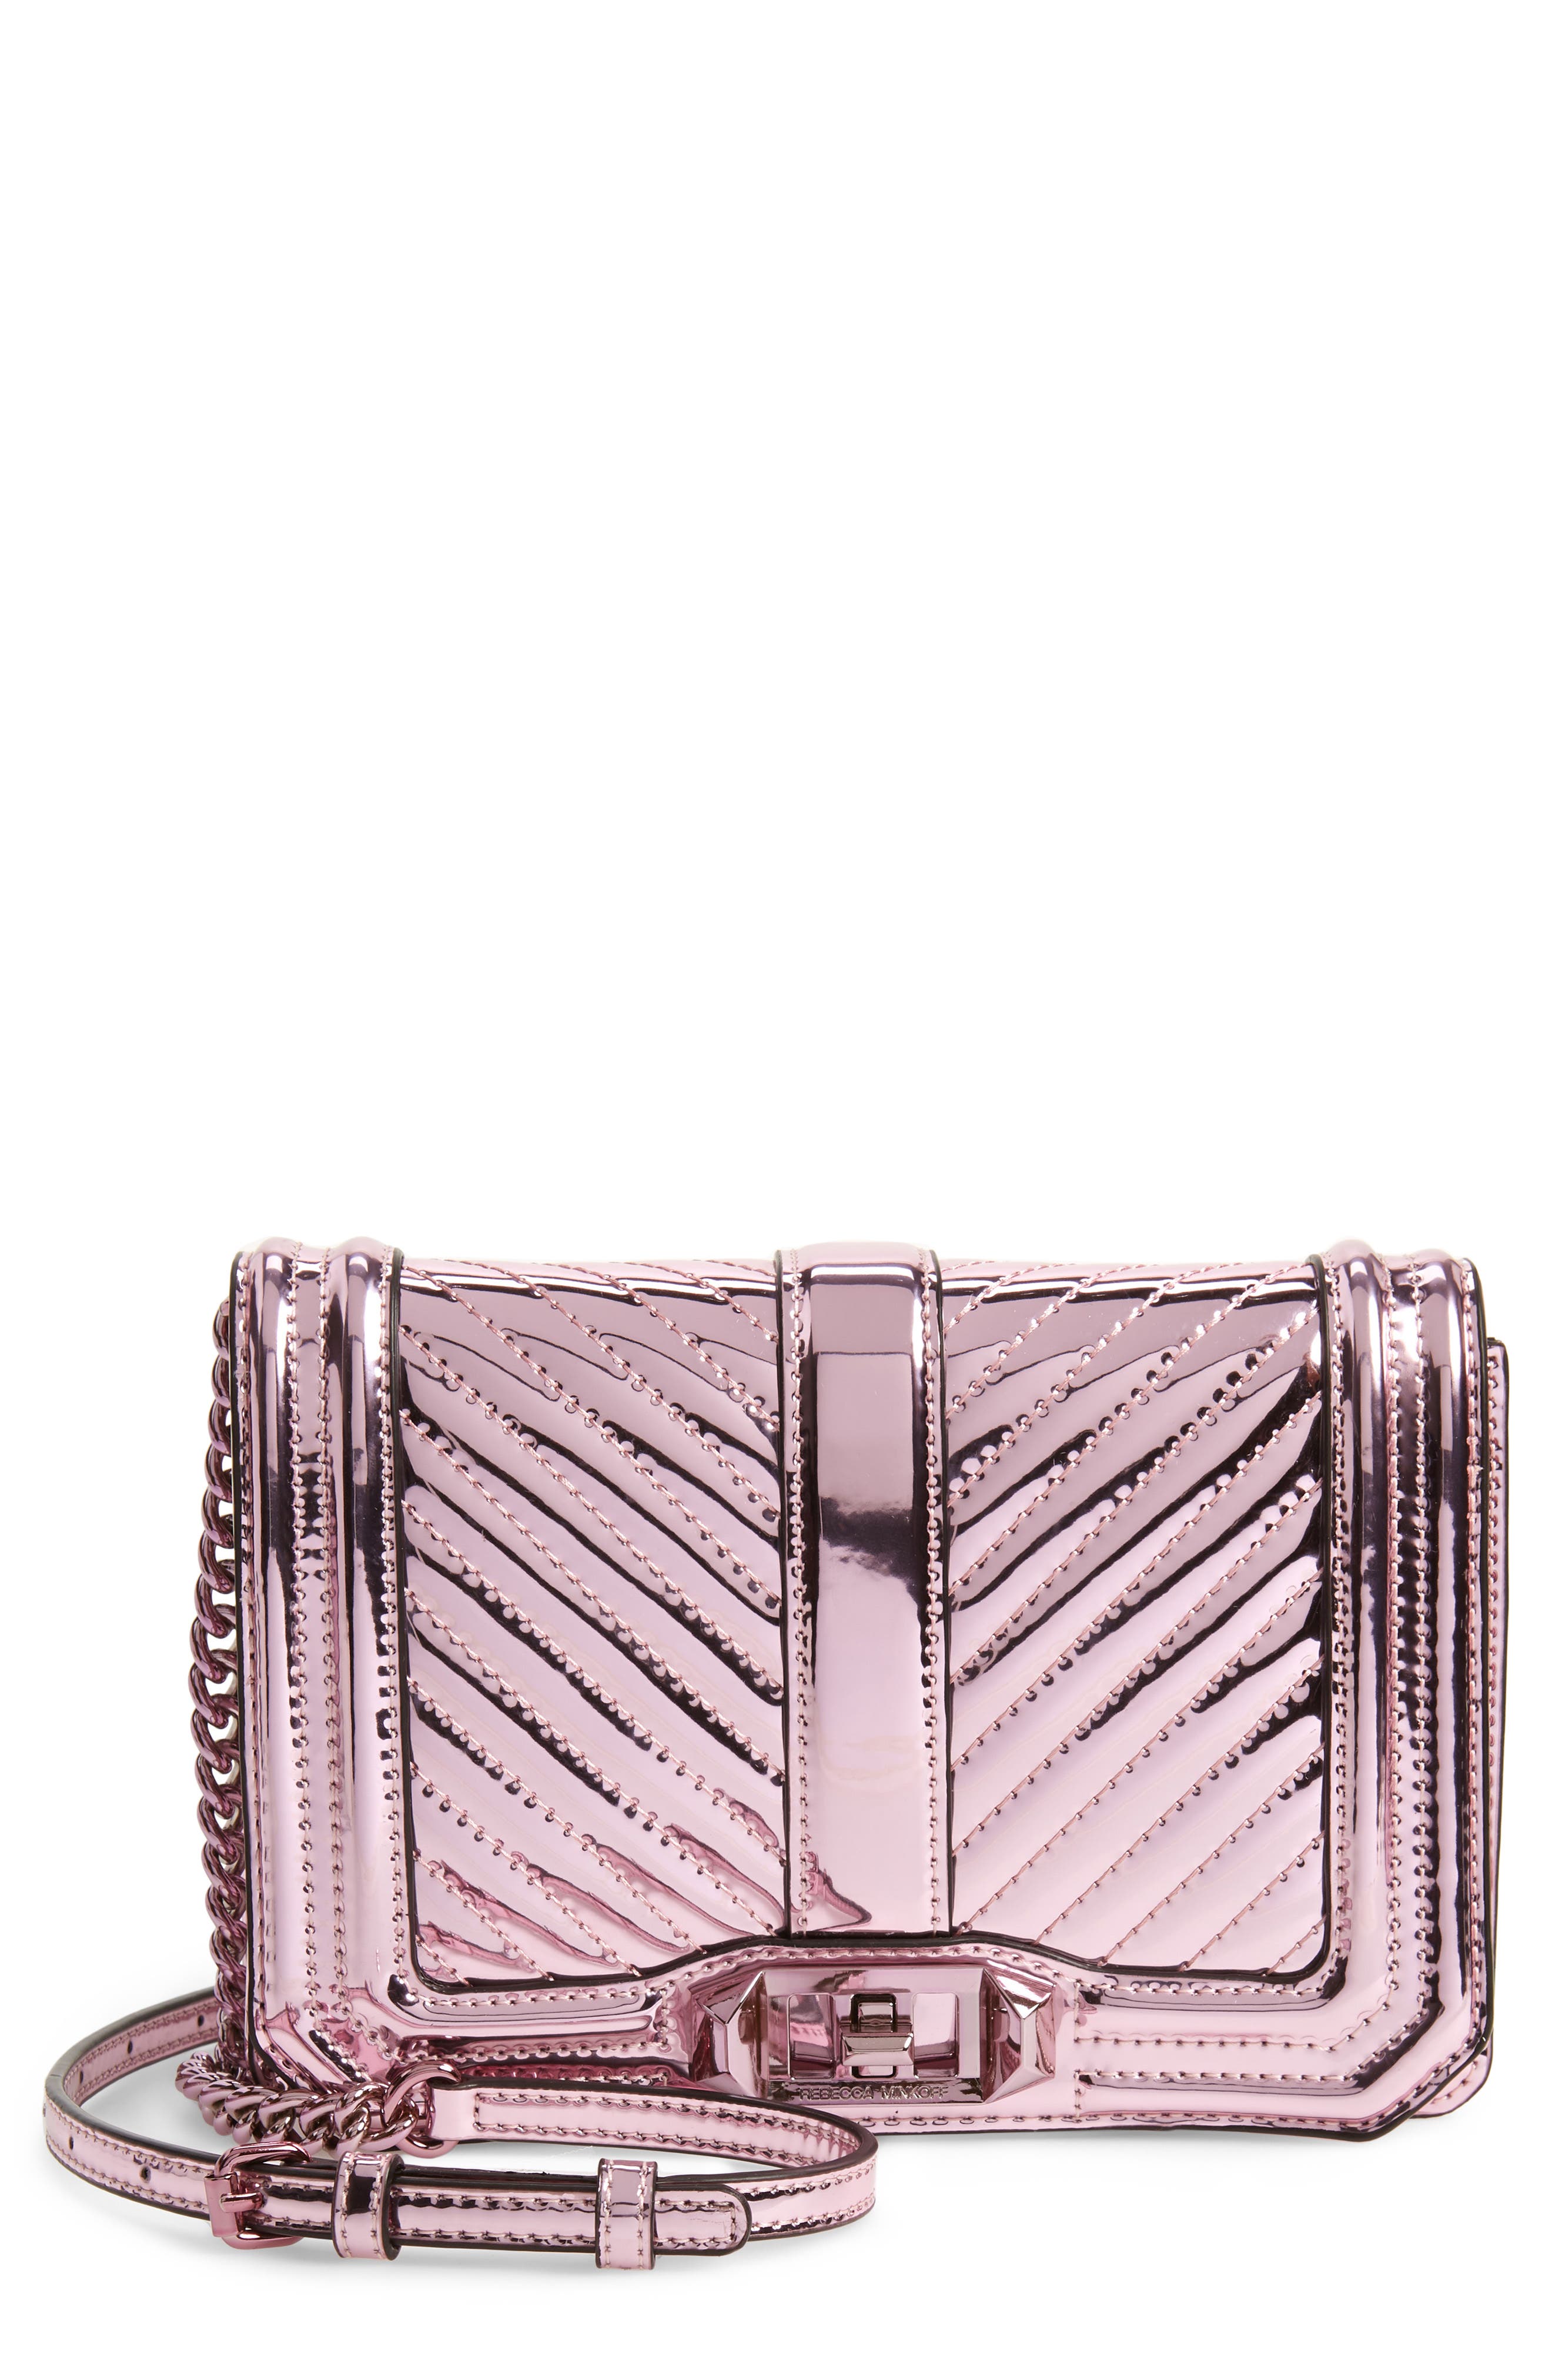 Rebecca Minkoff Leathers SMALL LOVE QUILTED METALLIC CROSSBODY - PINK